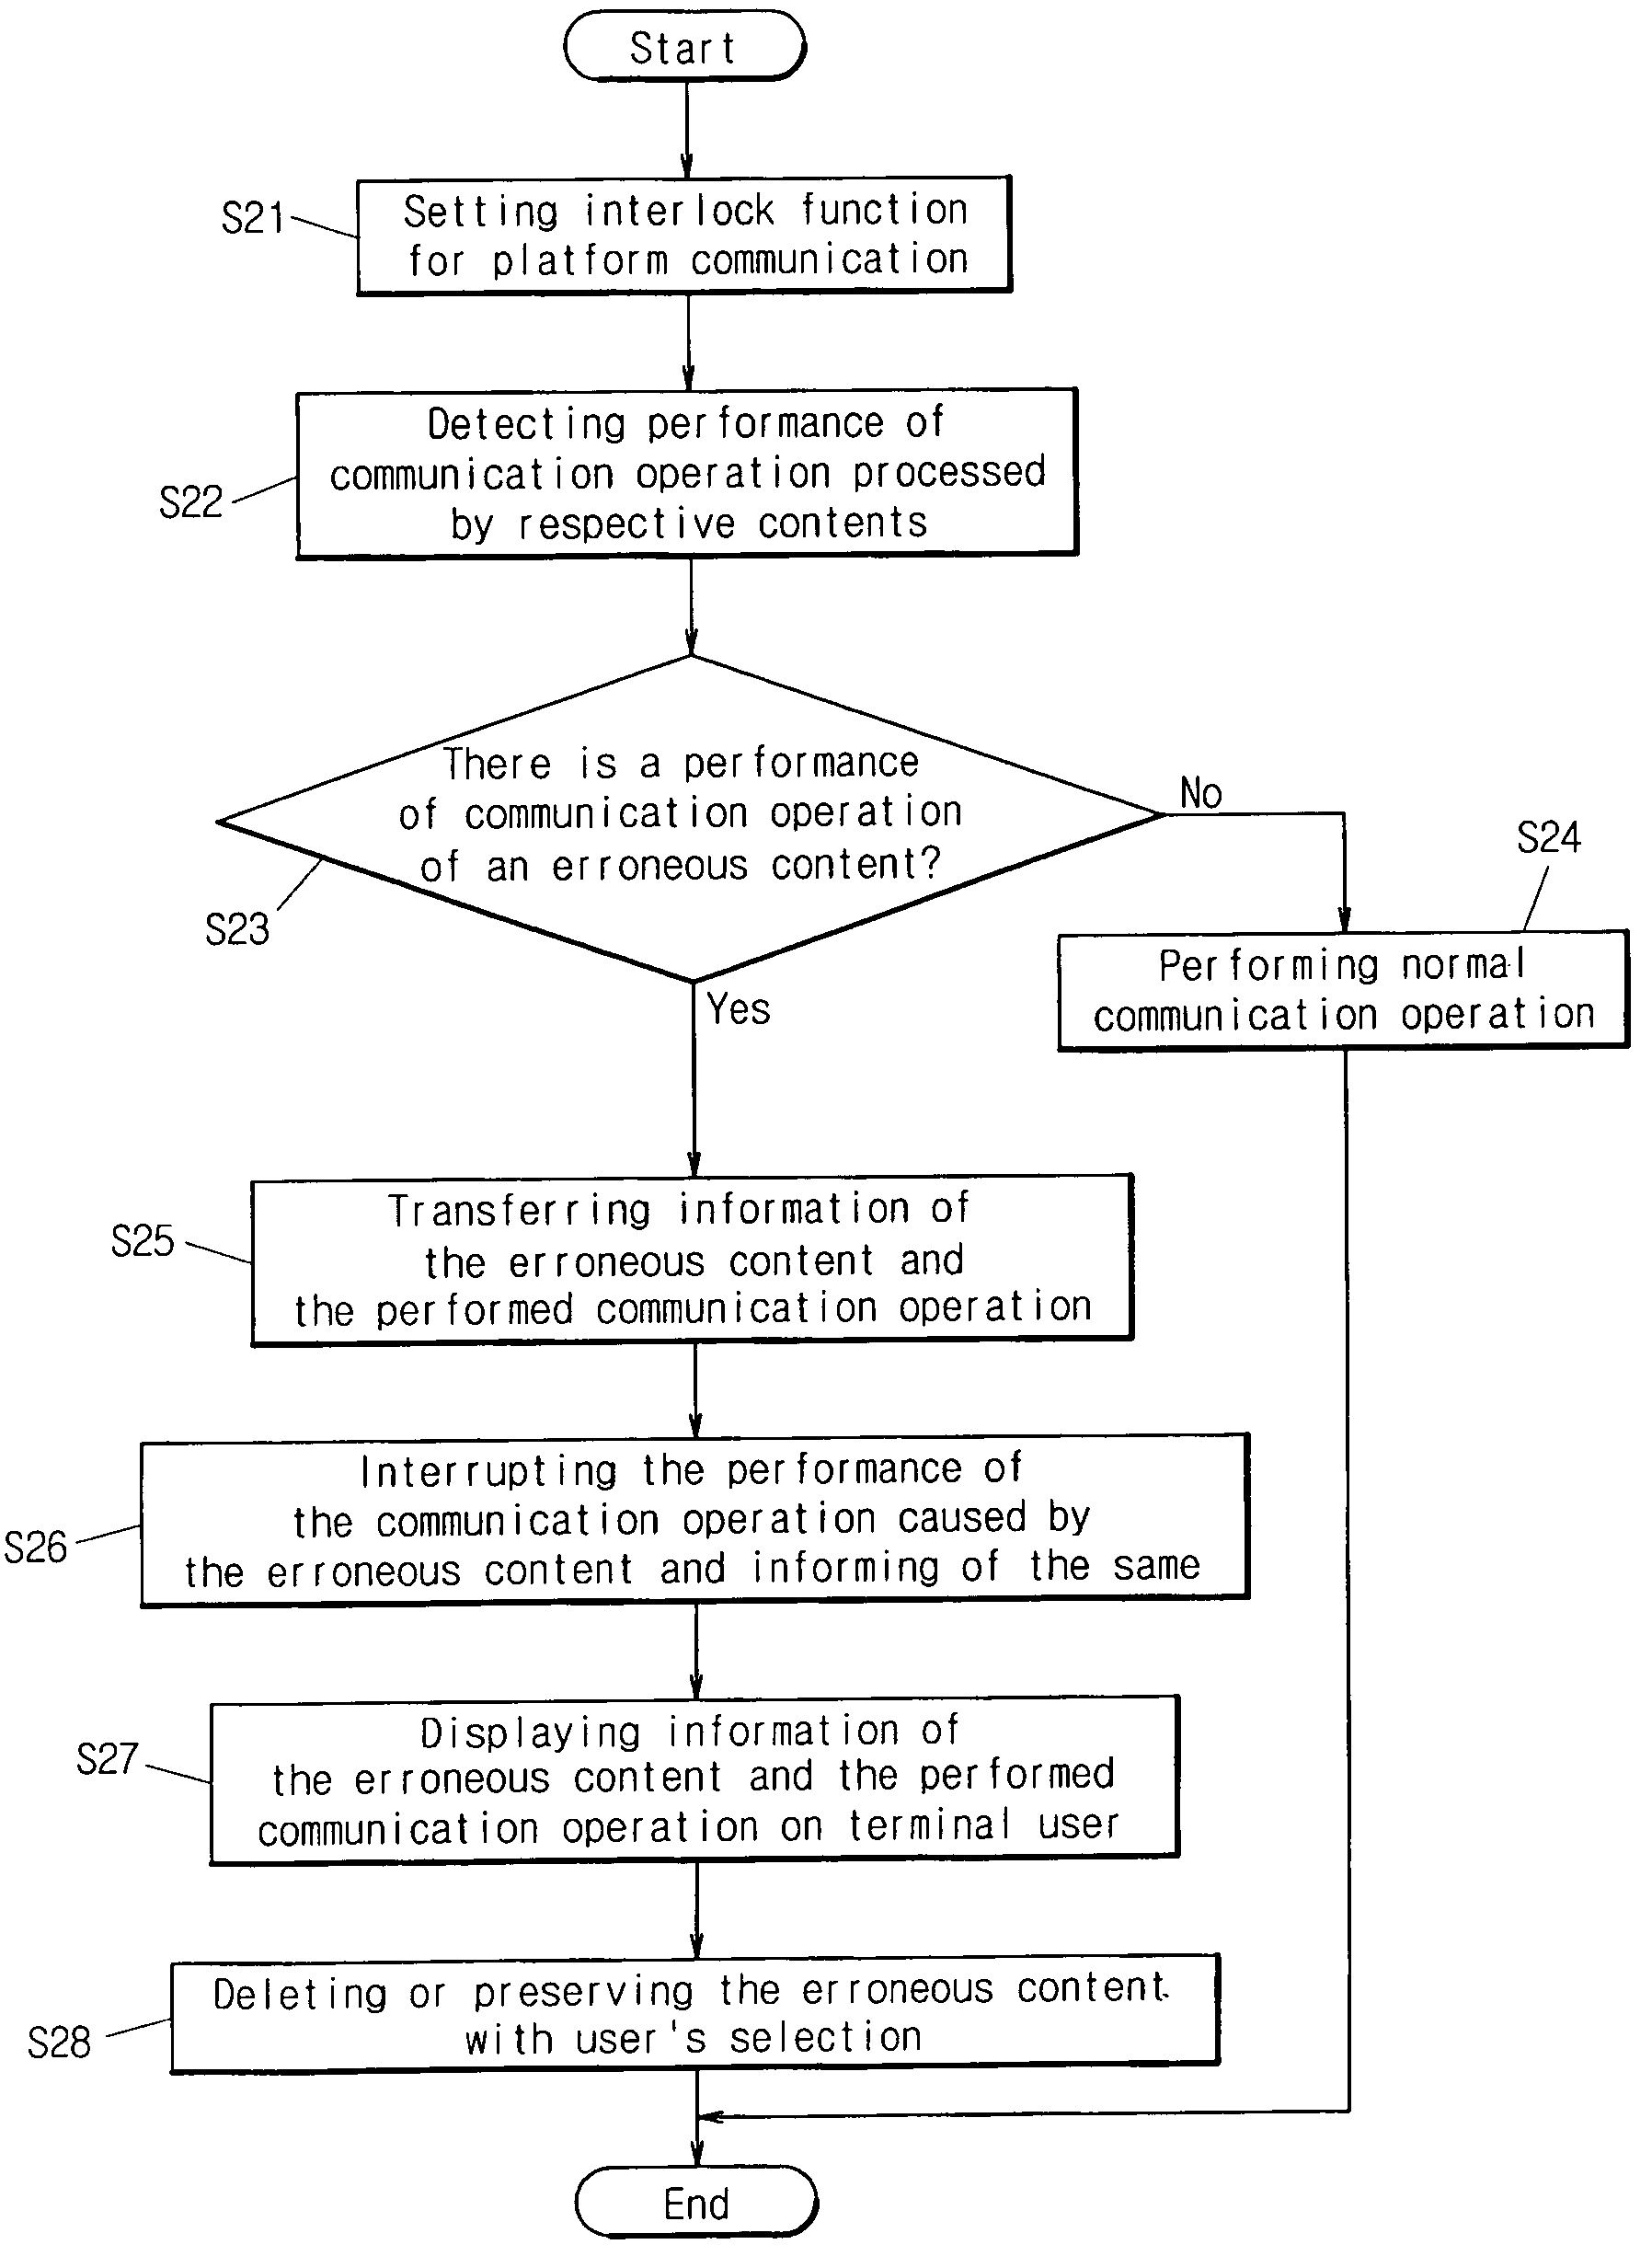 Apparatus and method for detecting communication operation resulted from an erroneous content in mobile platform